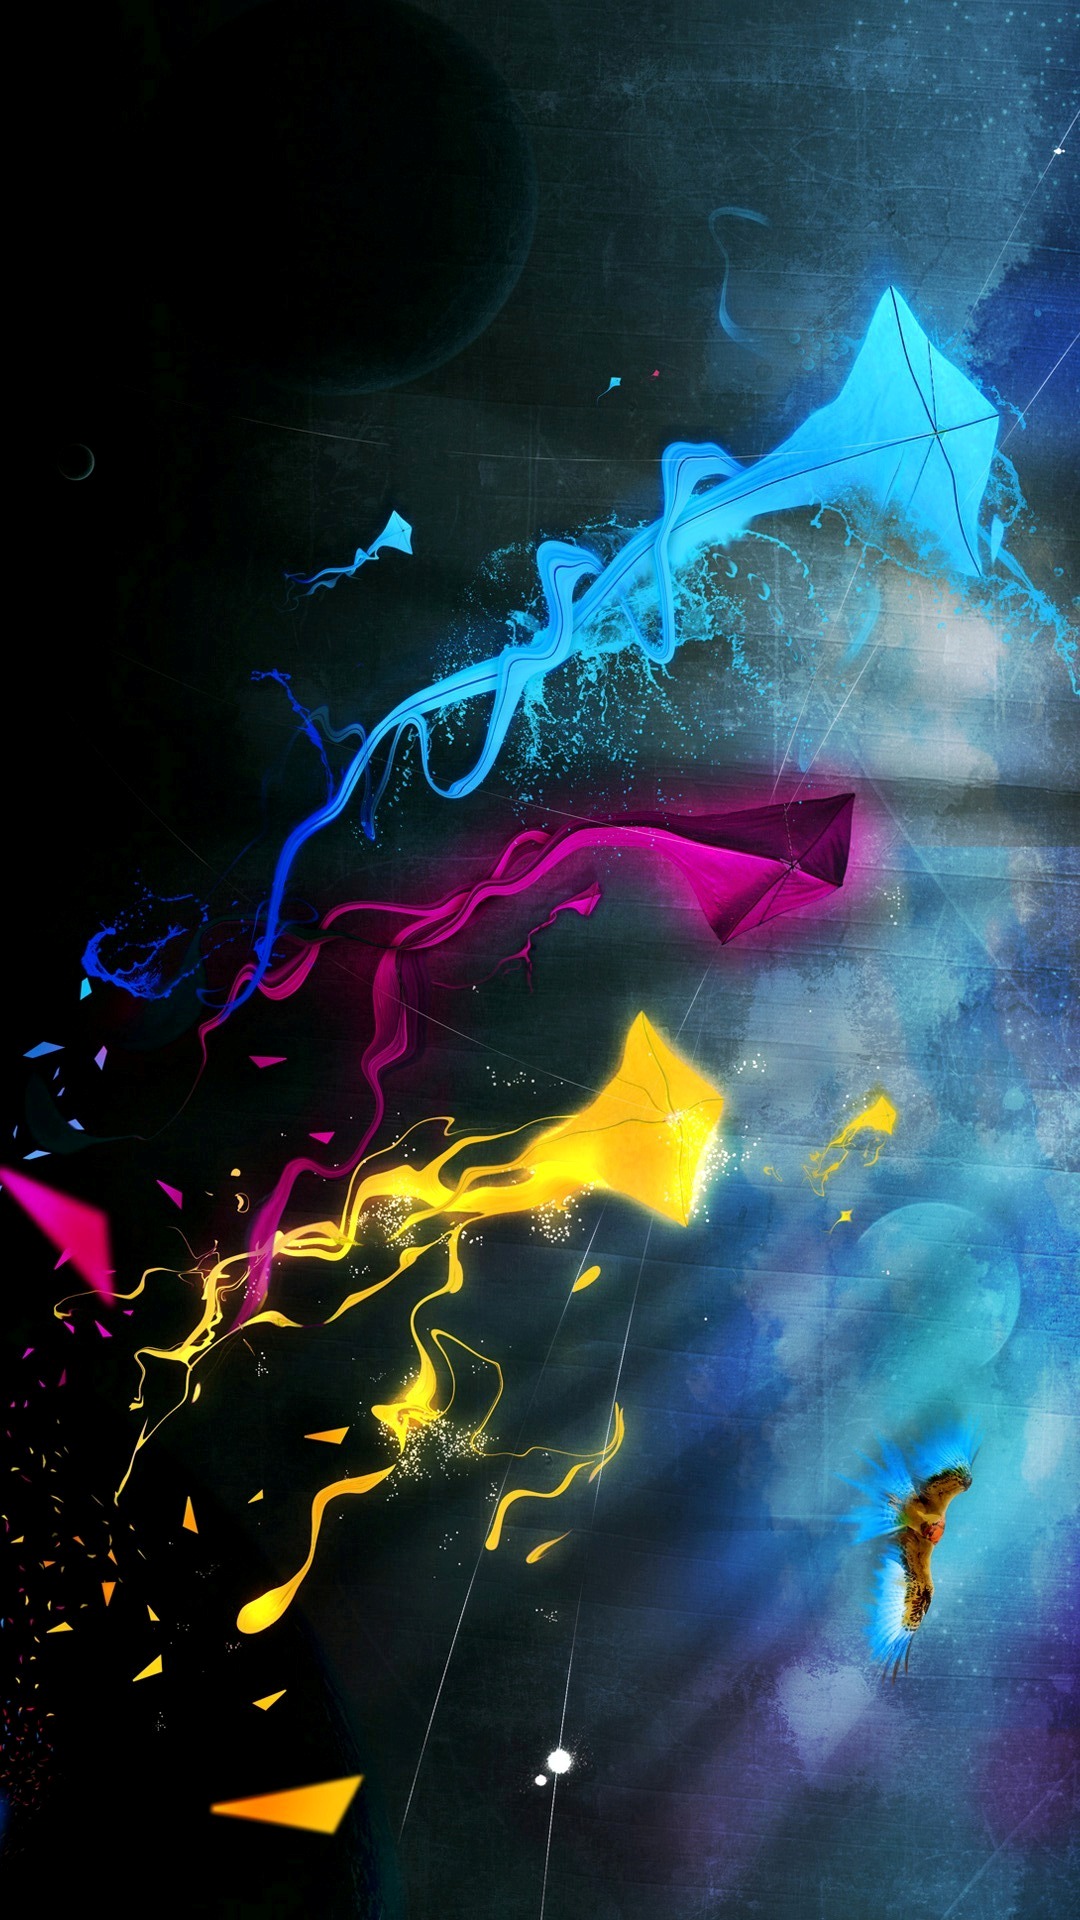 Cool Wallpaper In Hd For Mobile